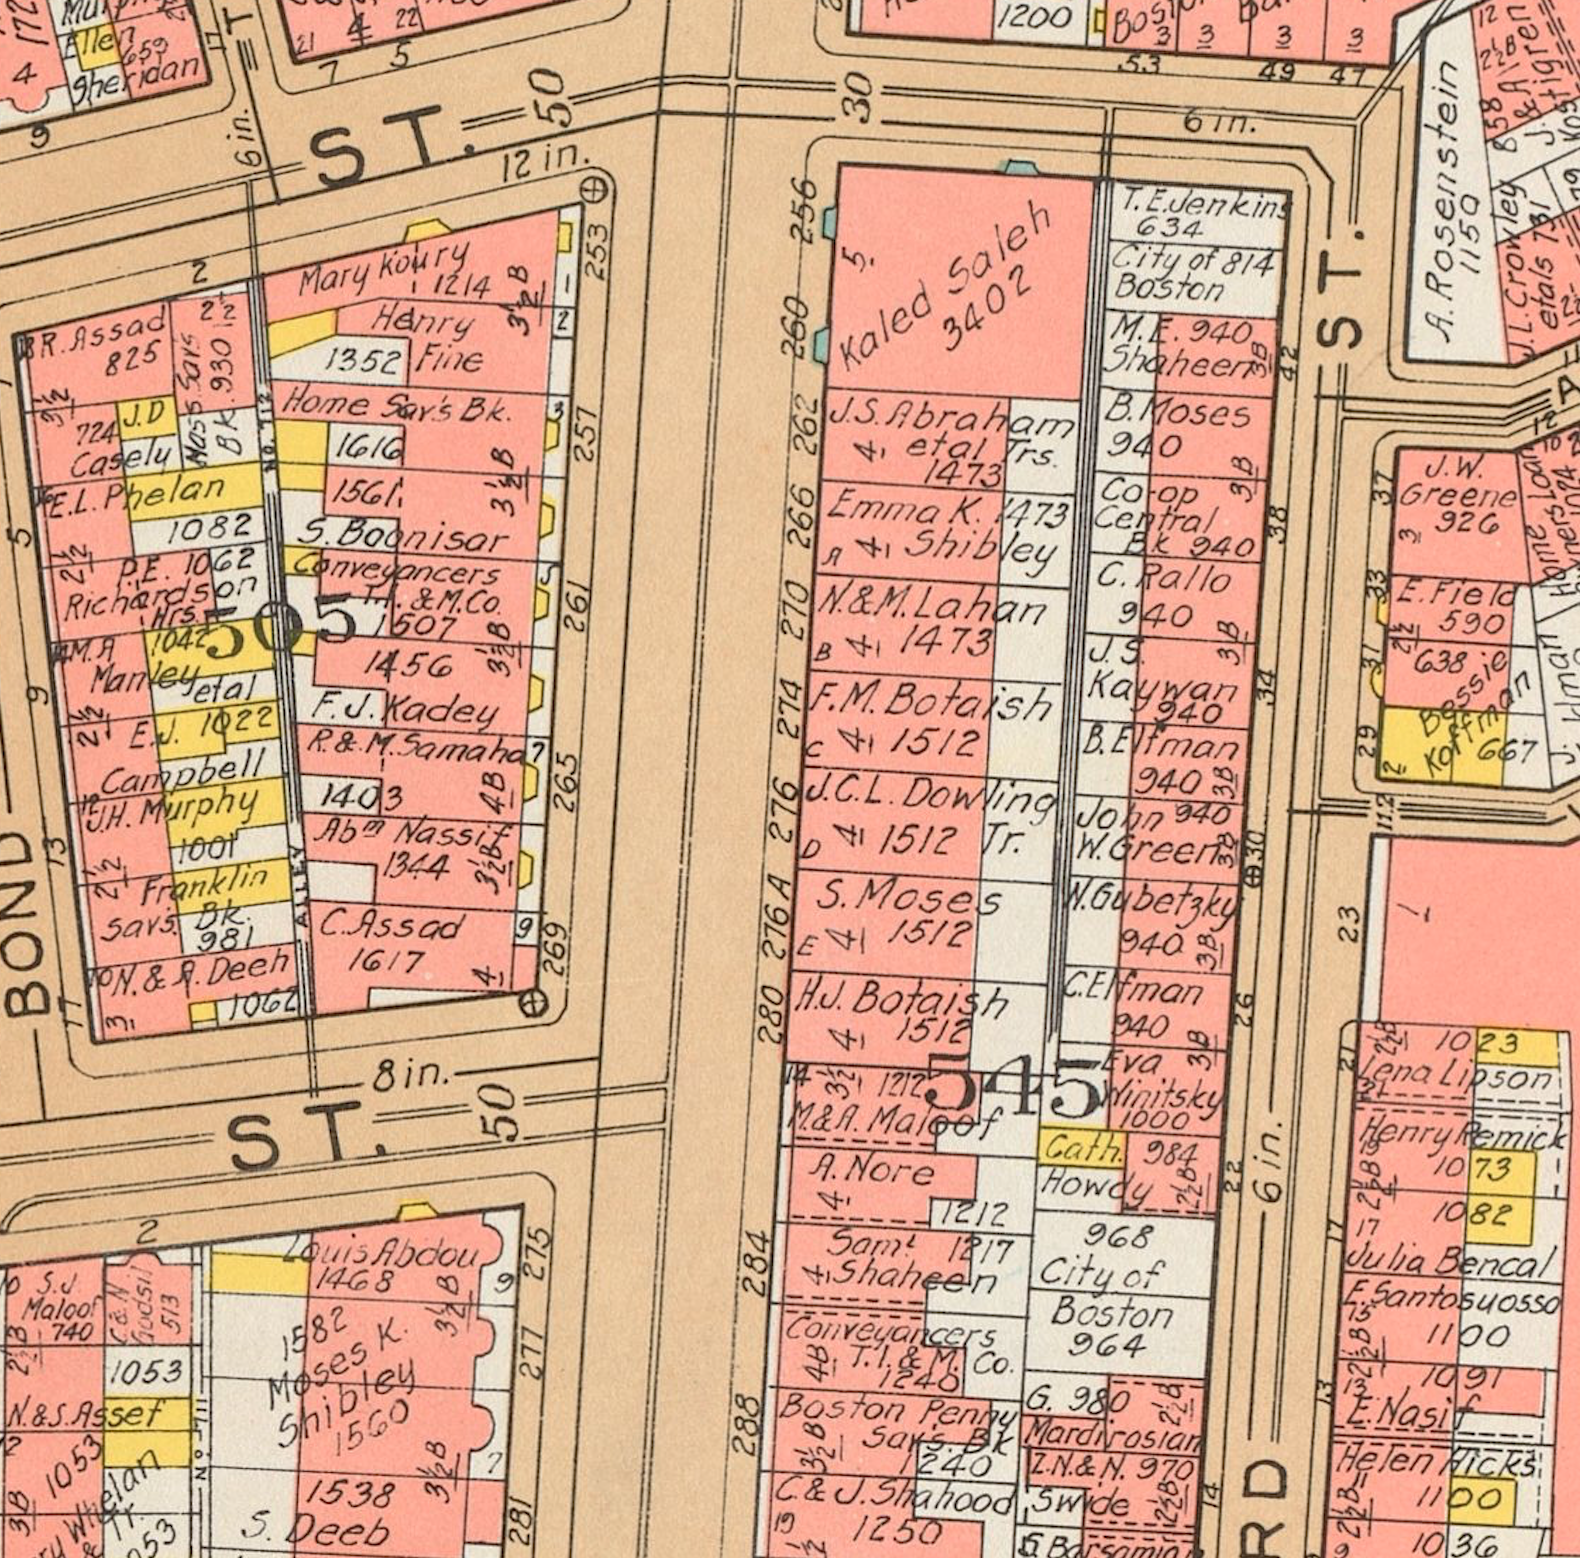 Section of a property map